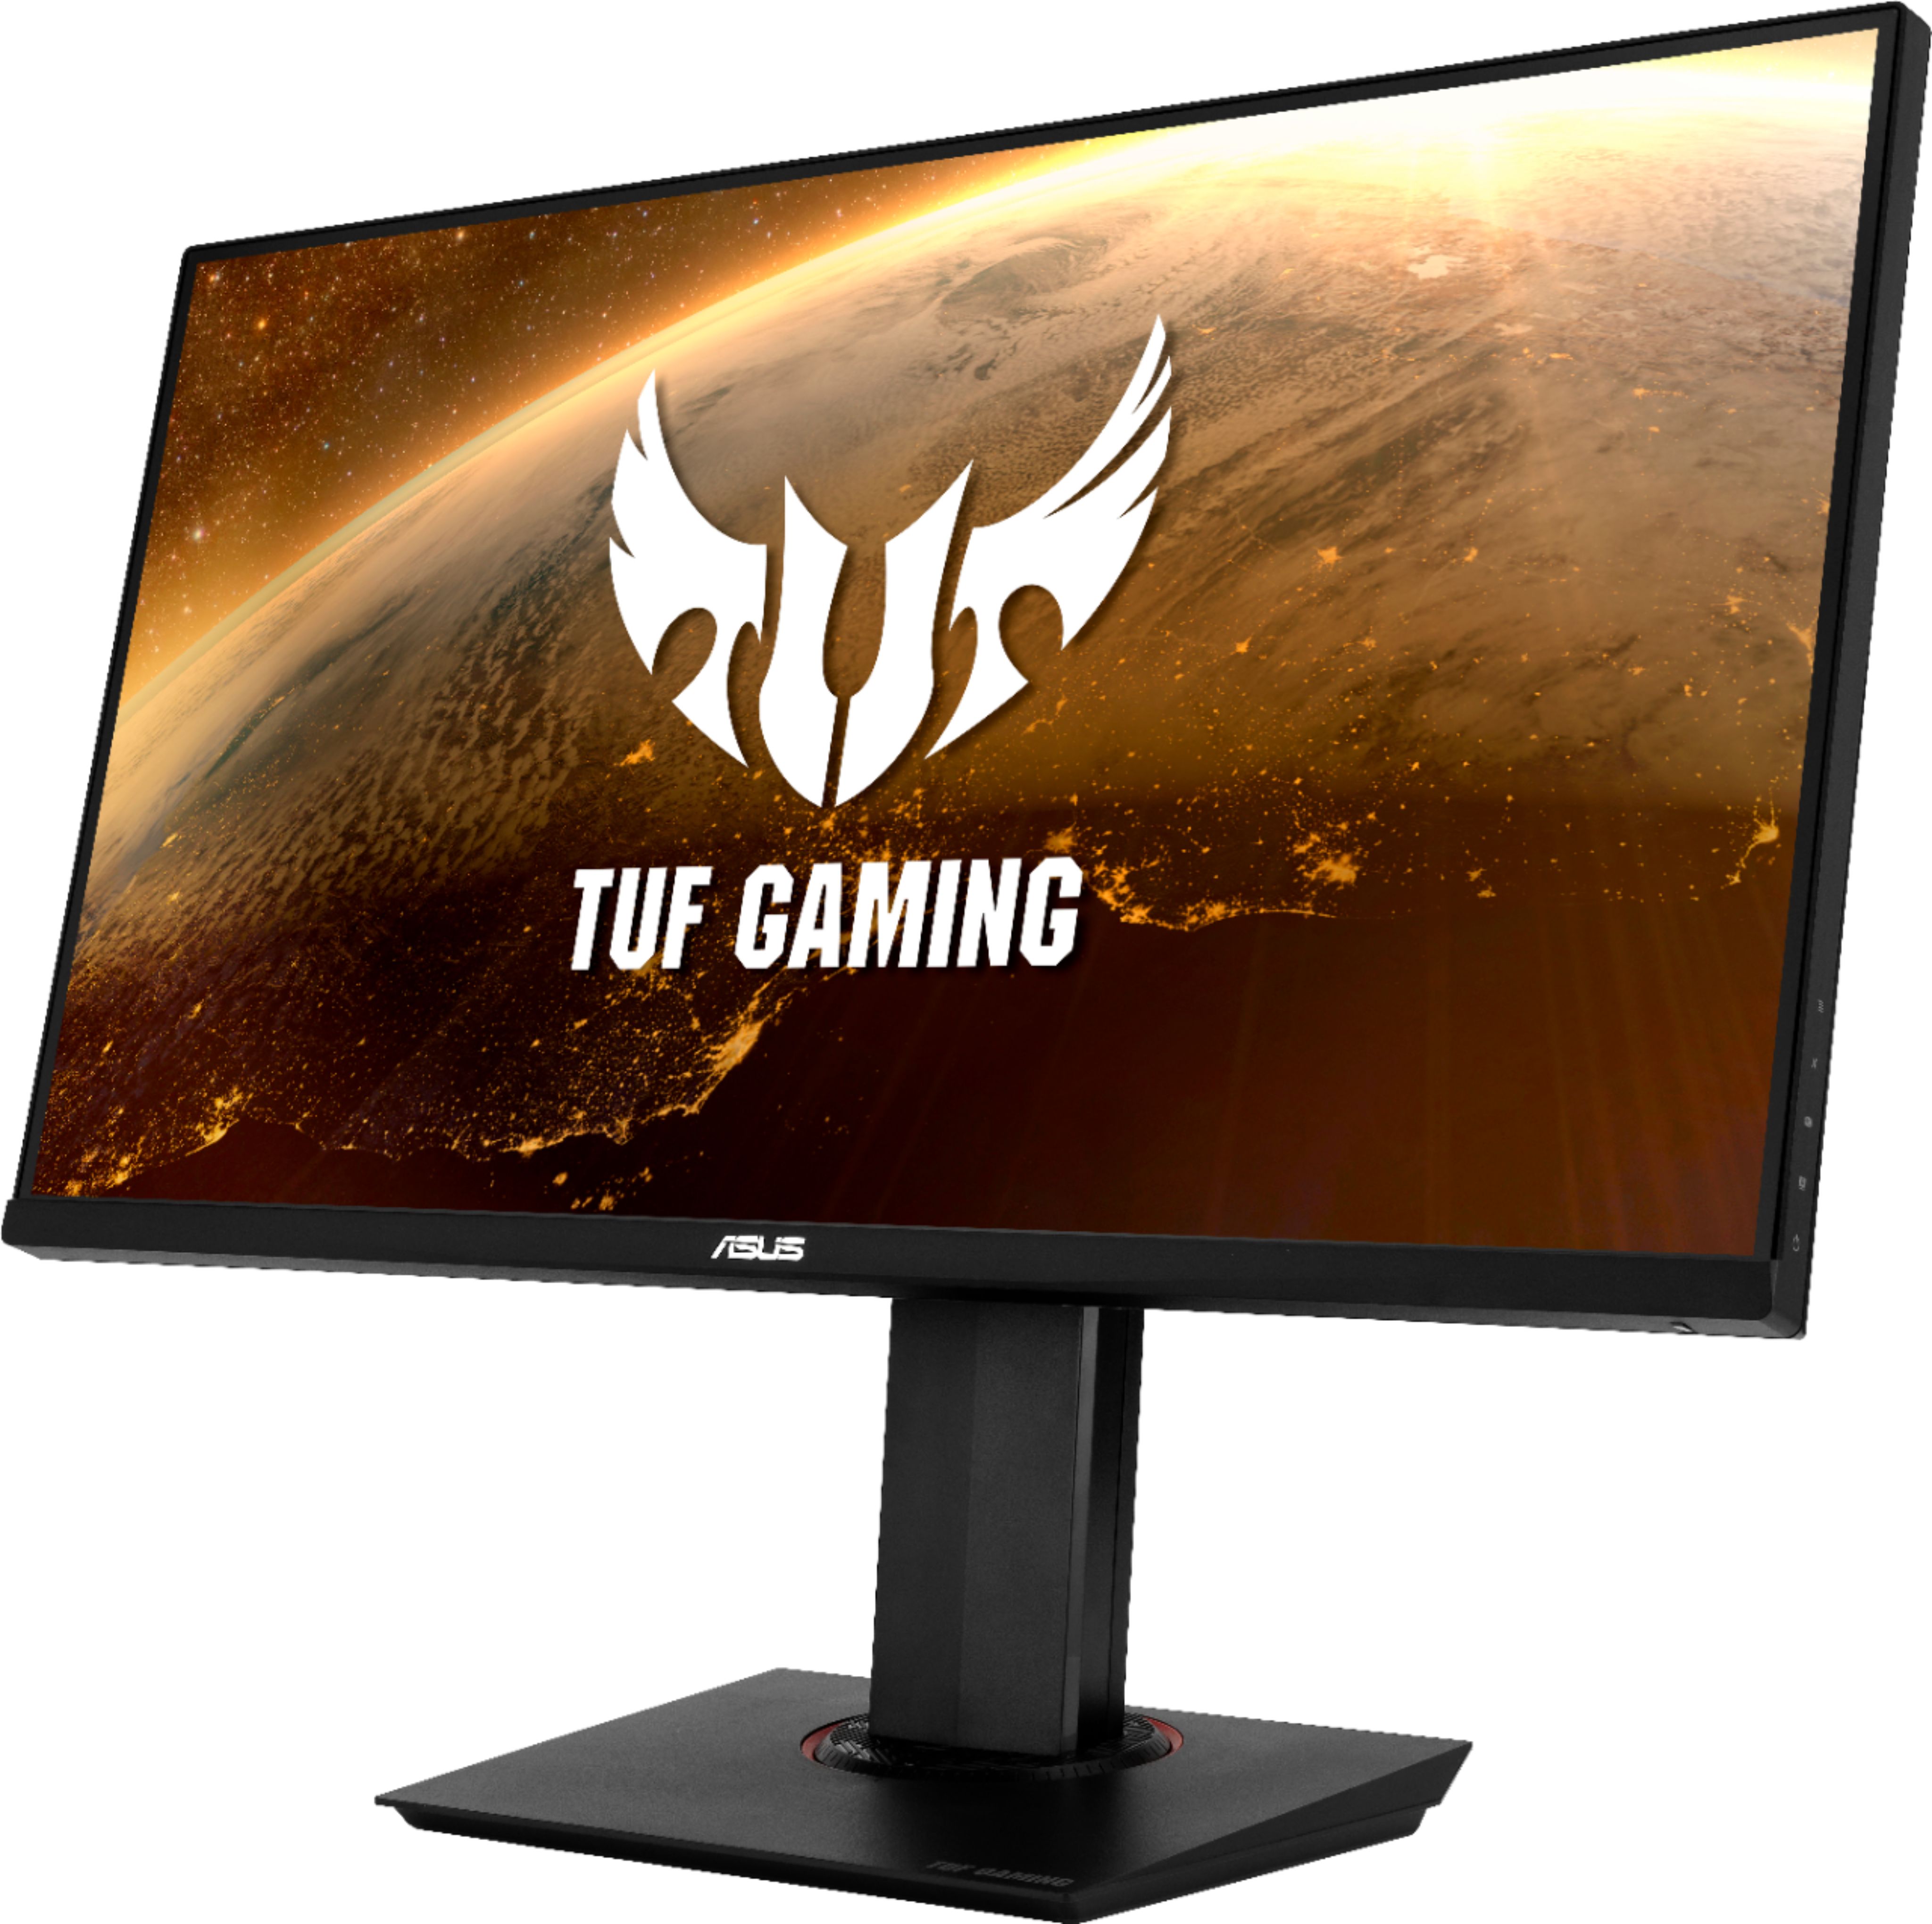 Left View: ASUS - Geek Squad Certified Refurbished TUF Gaming 28" IPS LED 4K UHD FreeSync Monitor with HDR - Black